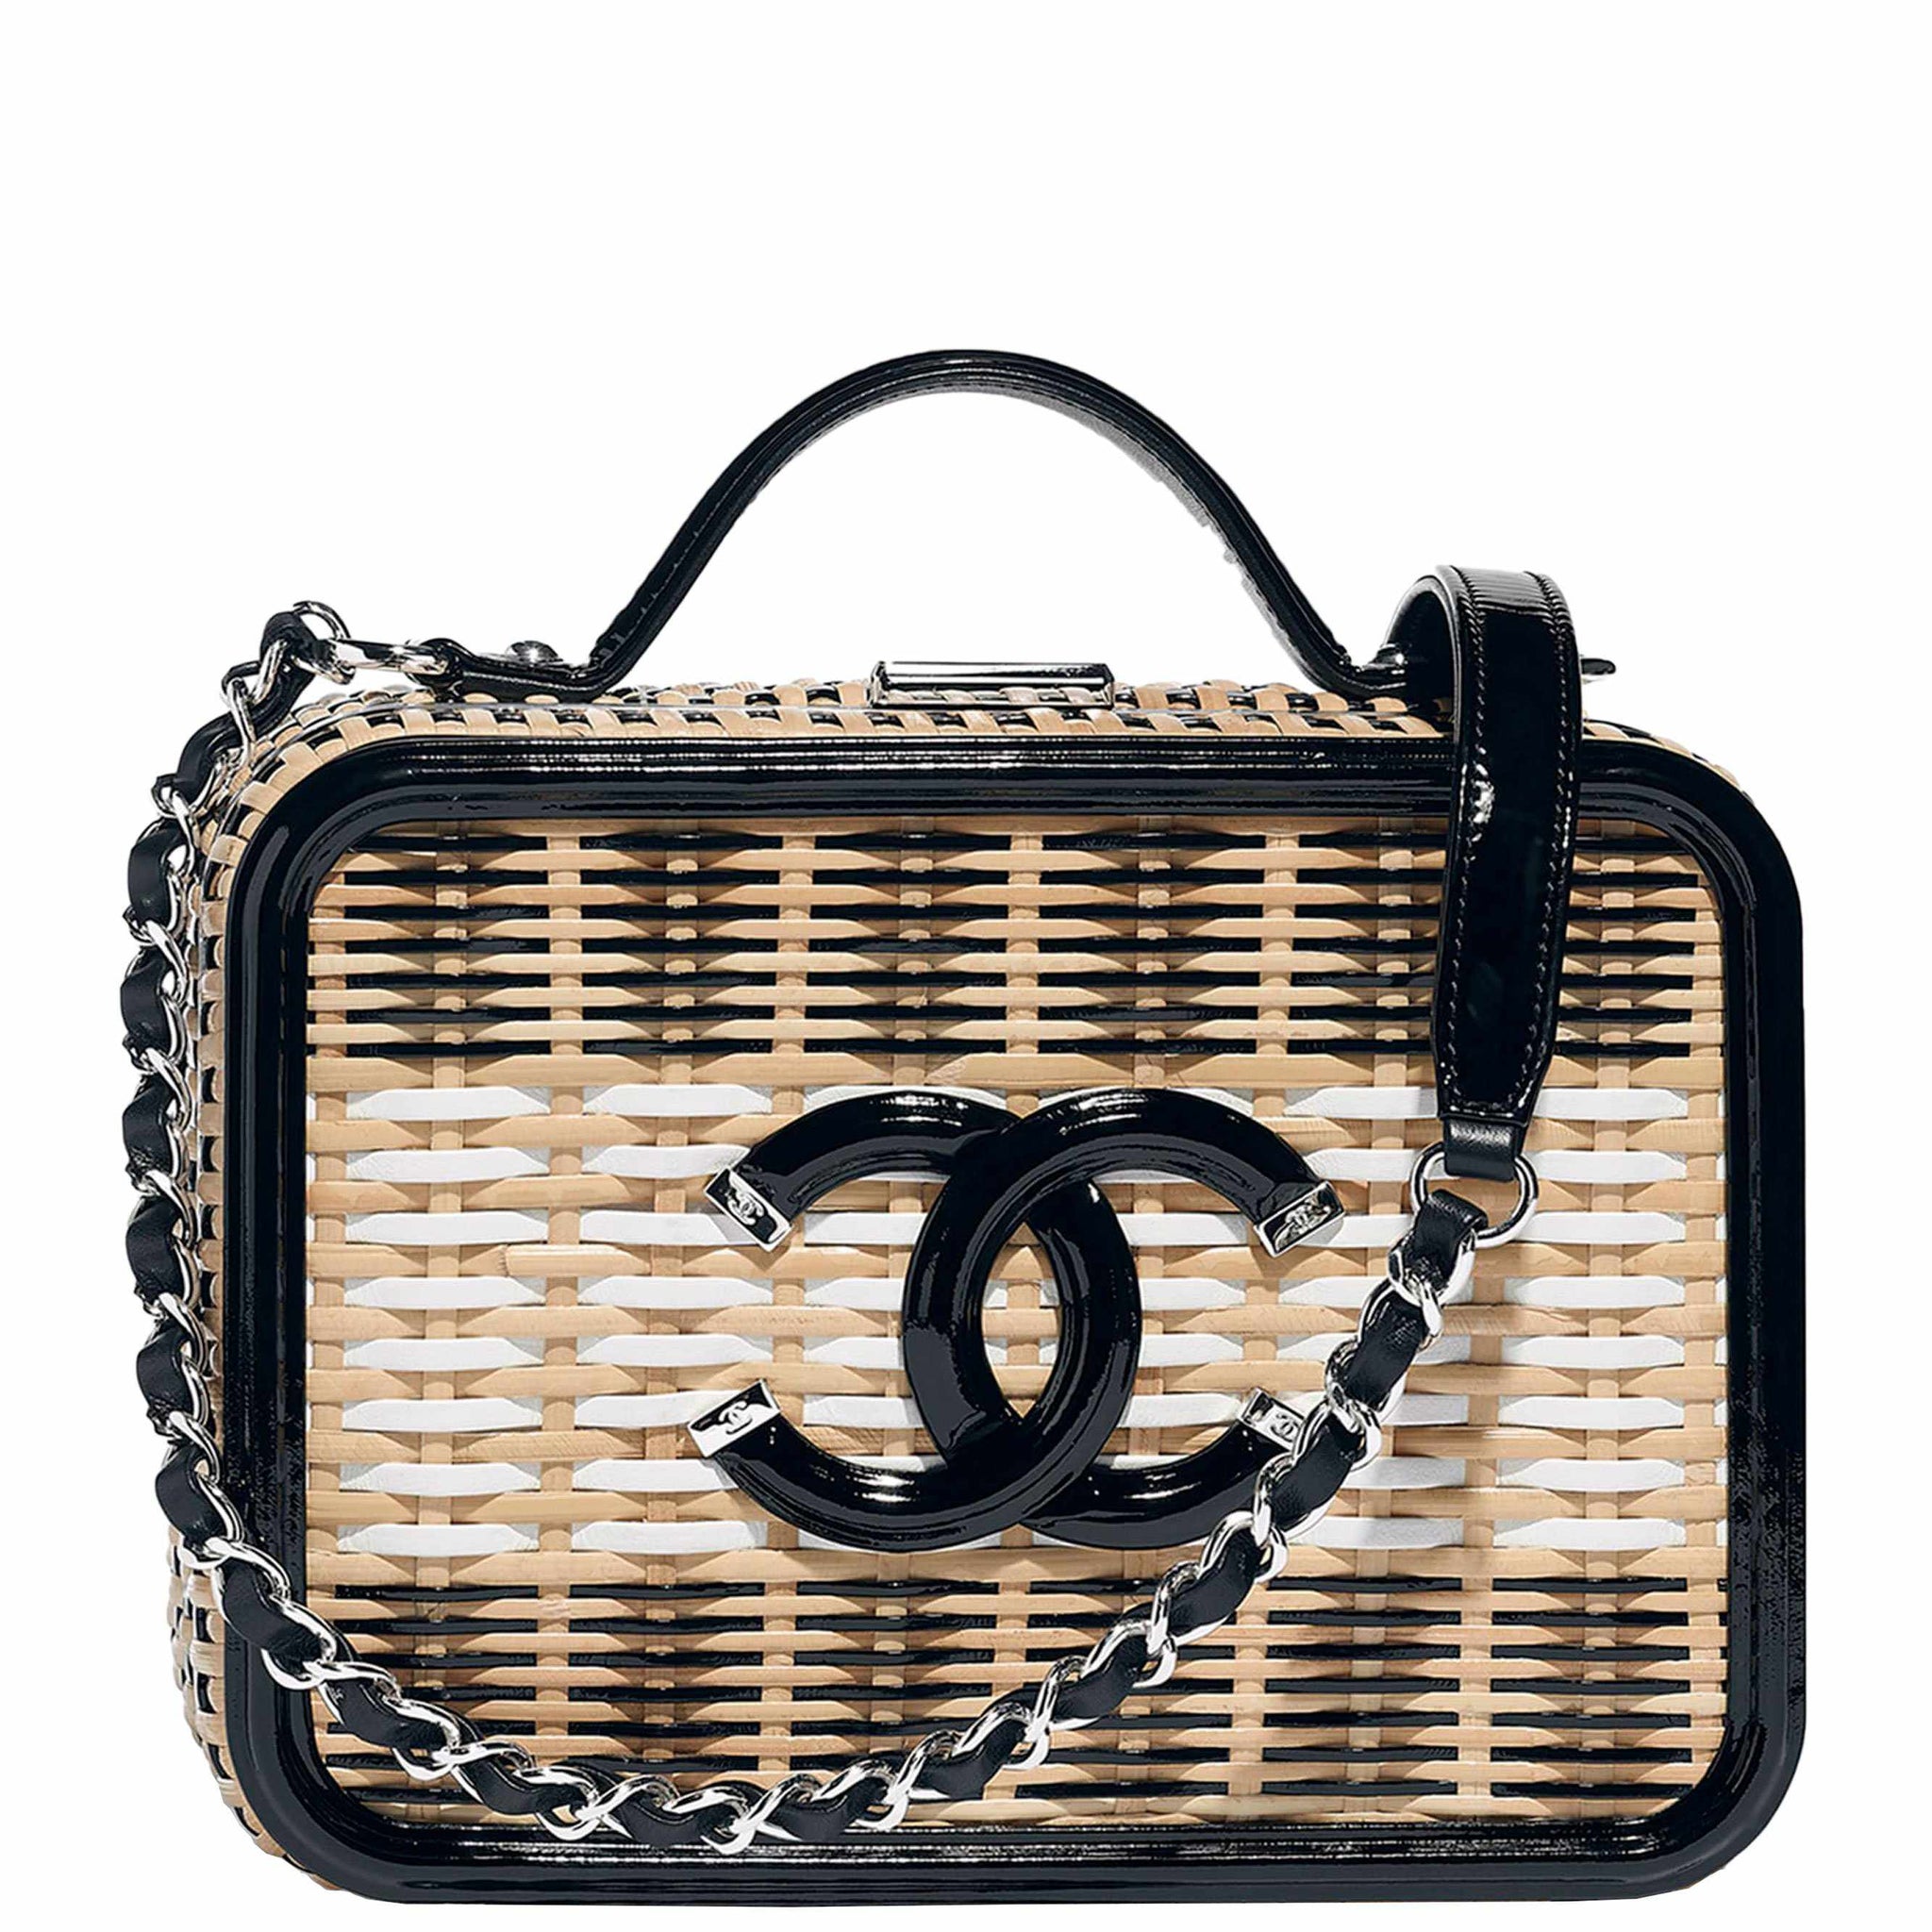 Chanel White Small Rattan Vanity Case Silver Hardware at 1stDibs